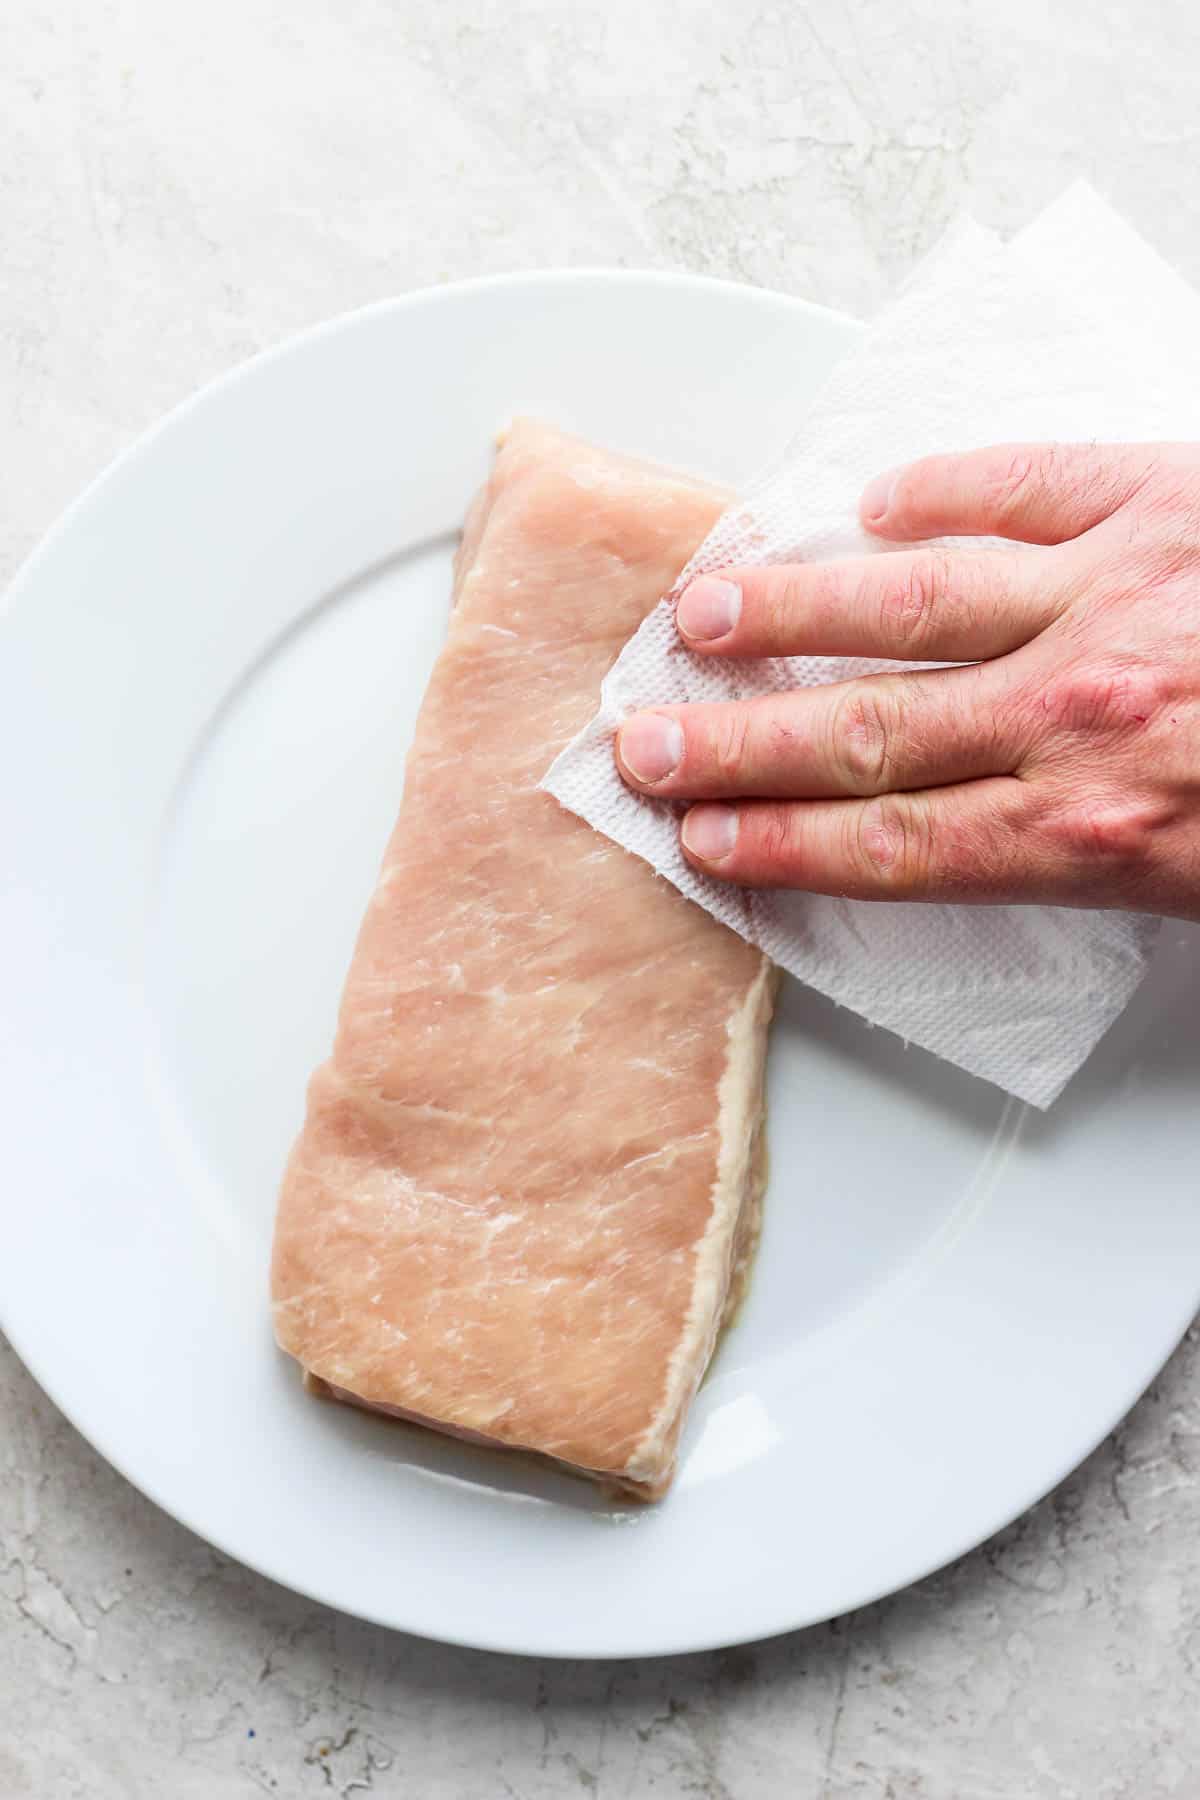 Someone patting dry a pork loin with a clean paper towel.